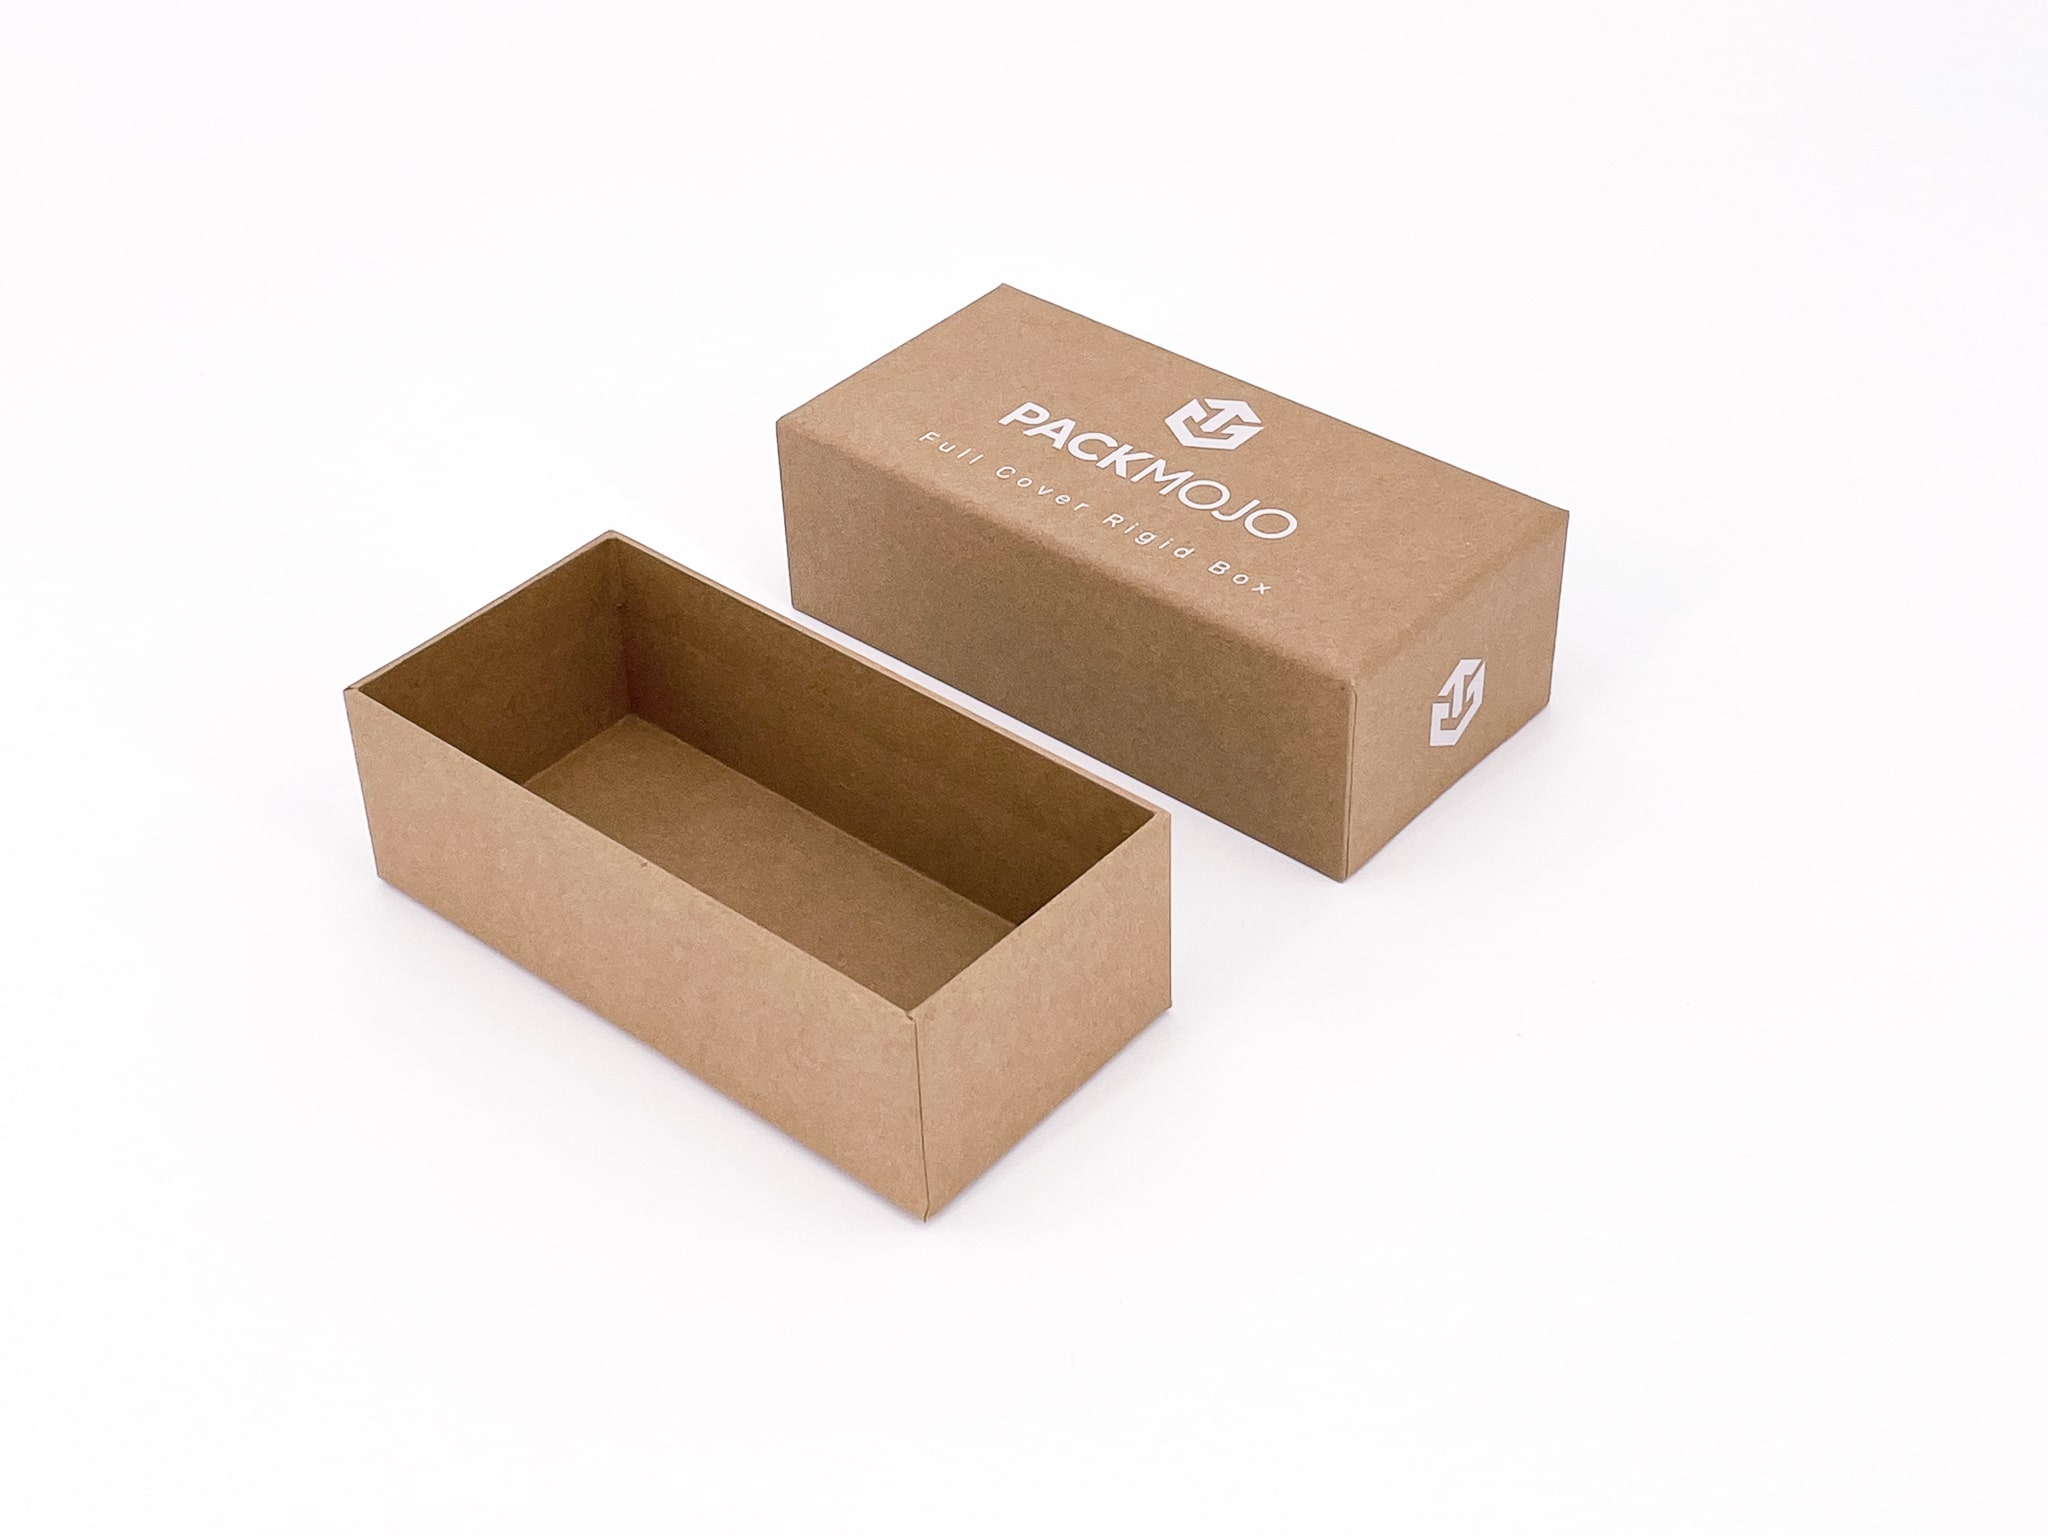 Exclusive sample boxes